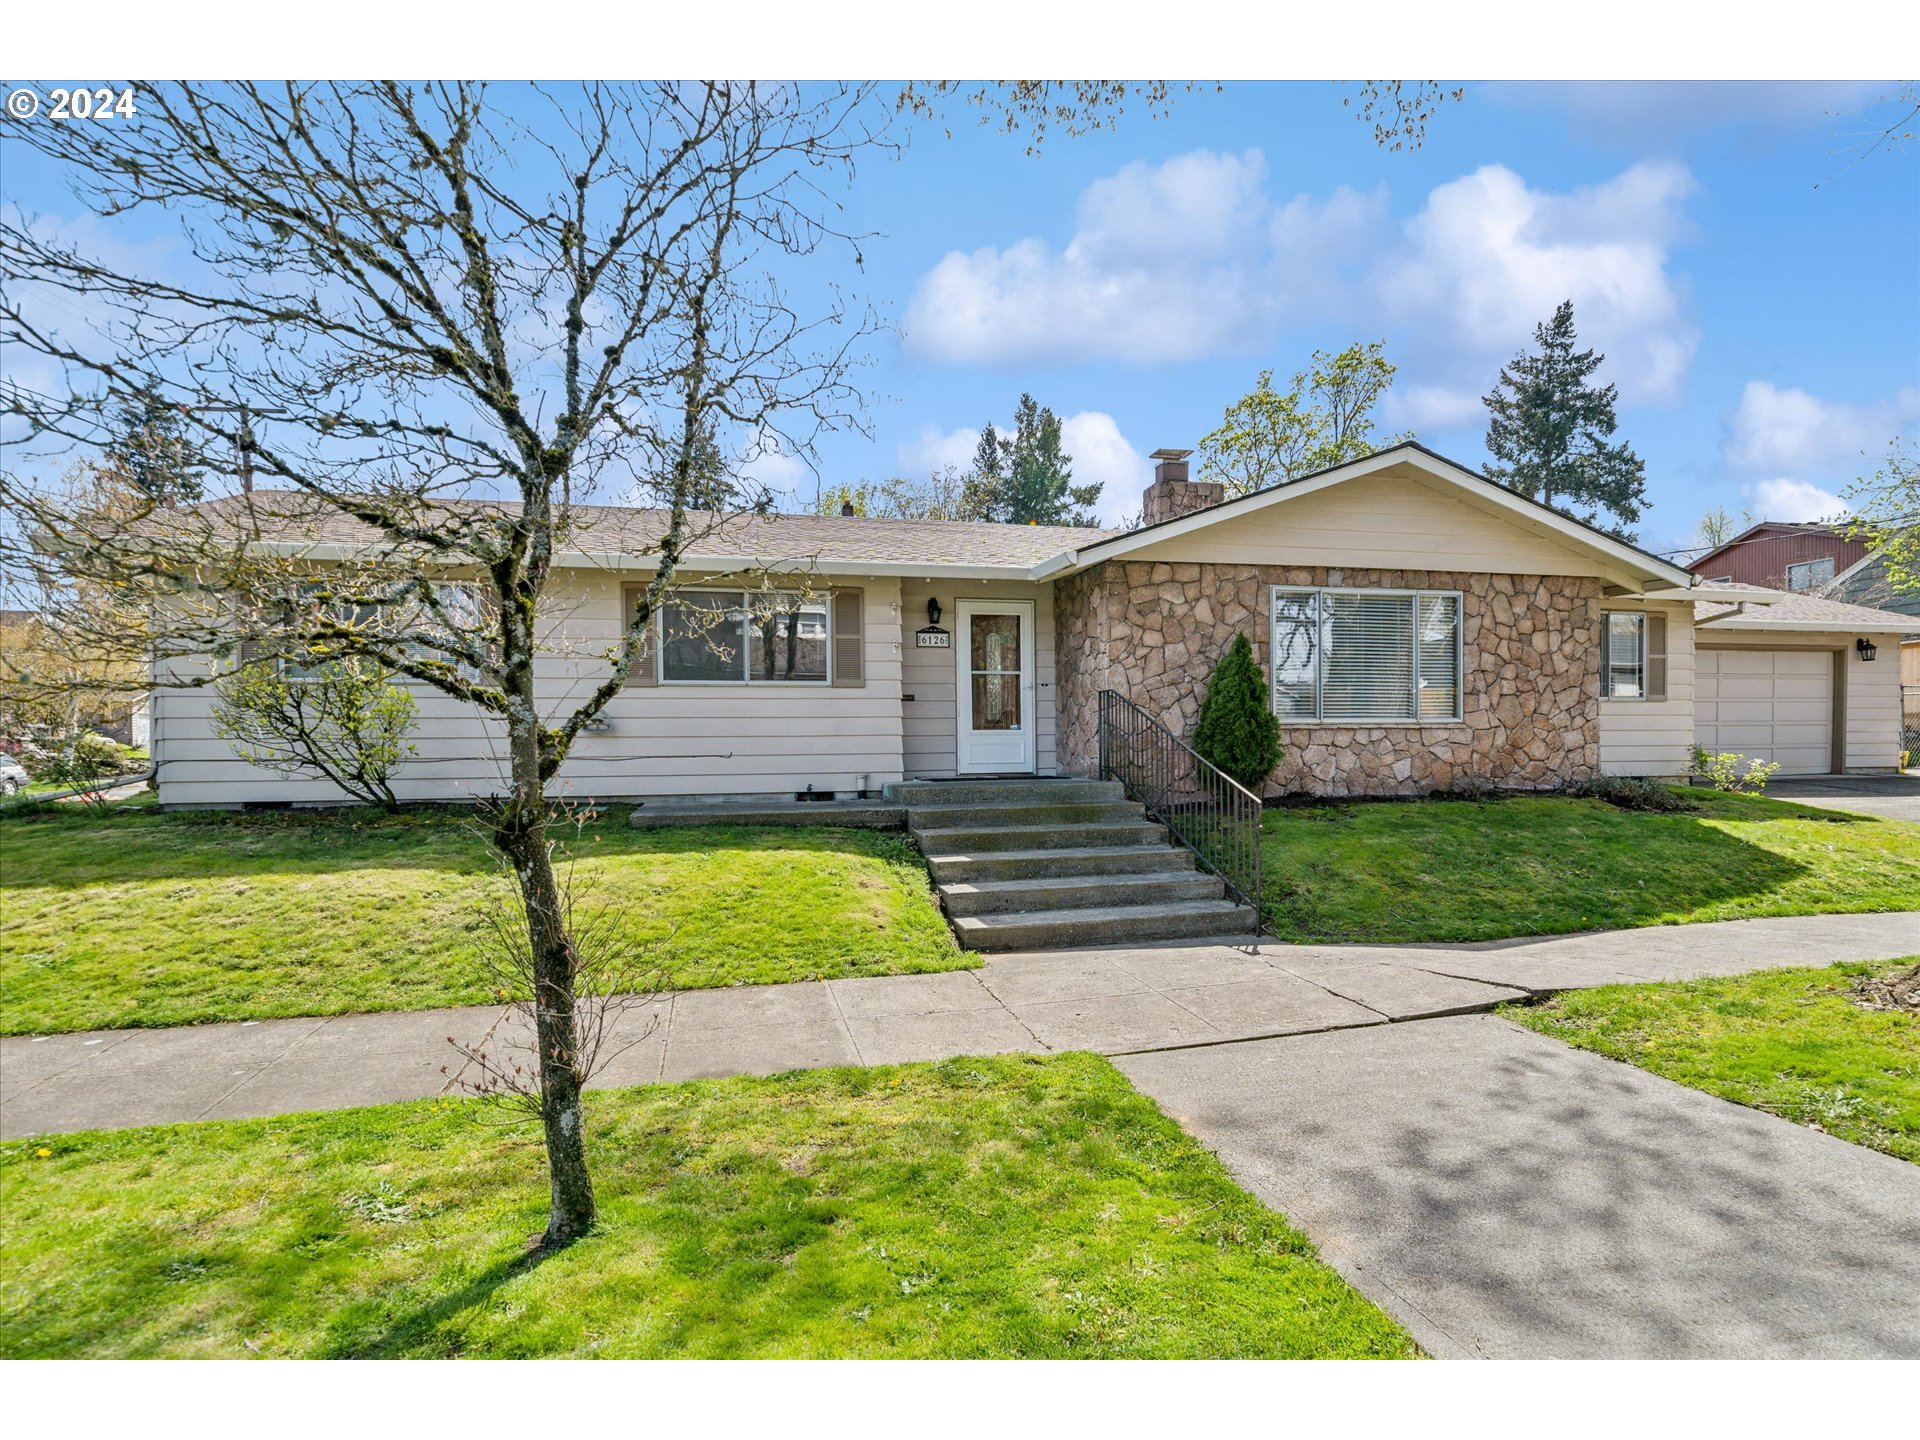 Lovely one level living in this well laid out ranch. Corner lot perched nicely above the bicycle and pedestrian corridor. Oversized attached garage(500sqft) bonus covered outdoor room(10x20) [Home Energy Score = 2. HES Report at https://rpt.greenbuildingregistry.com/hes/OR10075472]